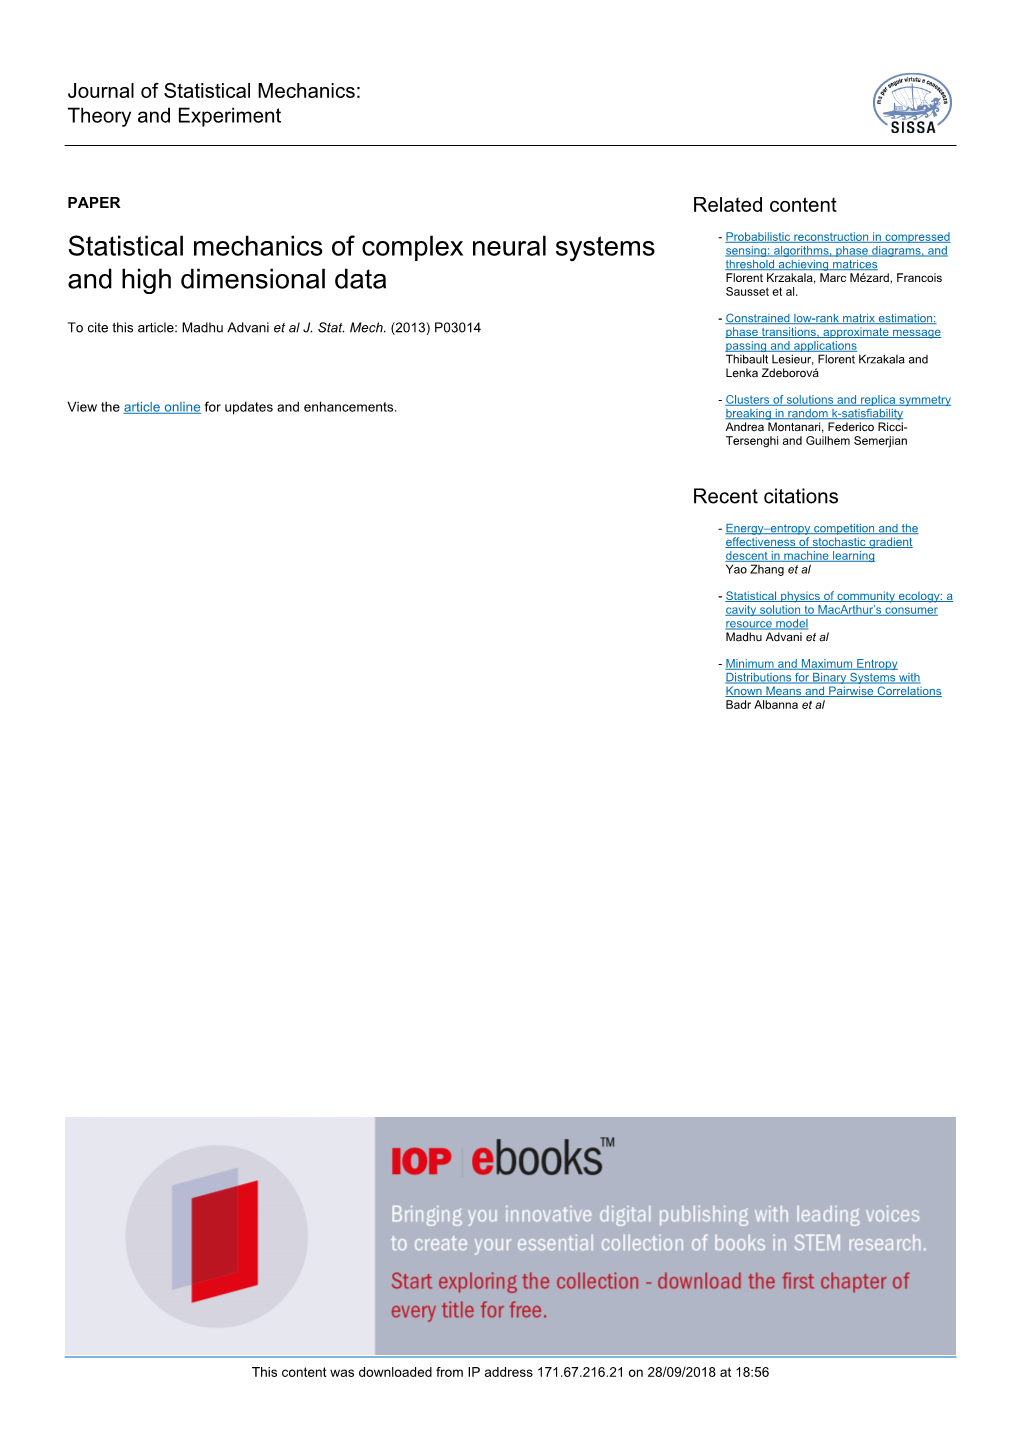 Statistical Mechanics of Complex Neural Systems and High